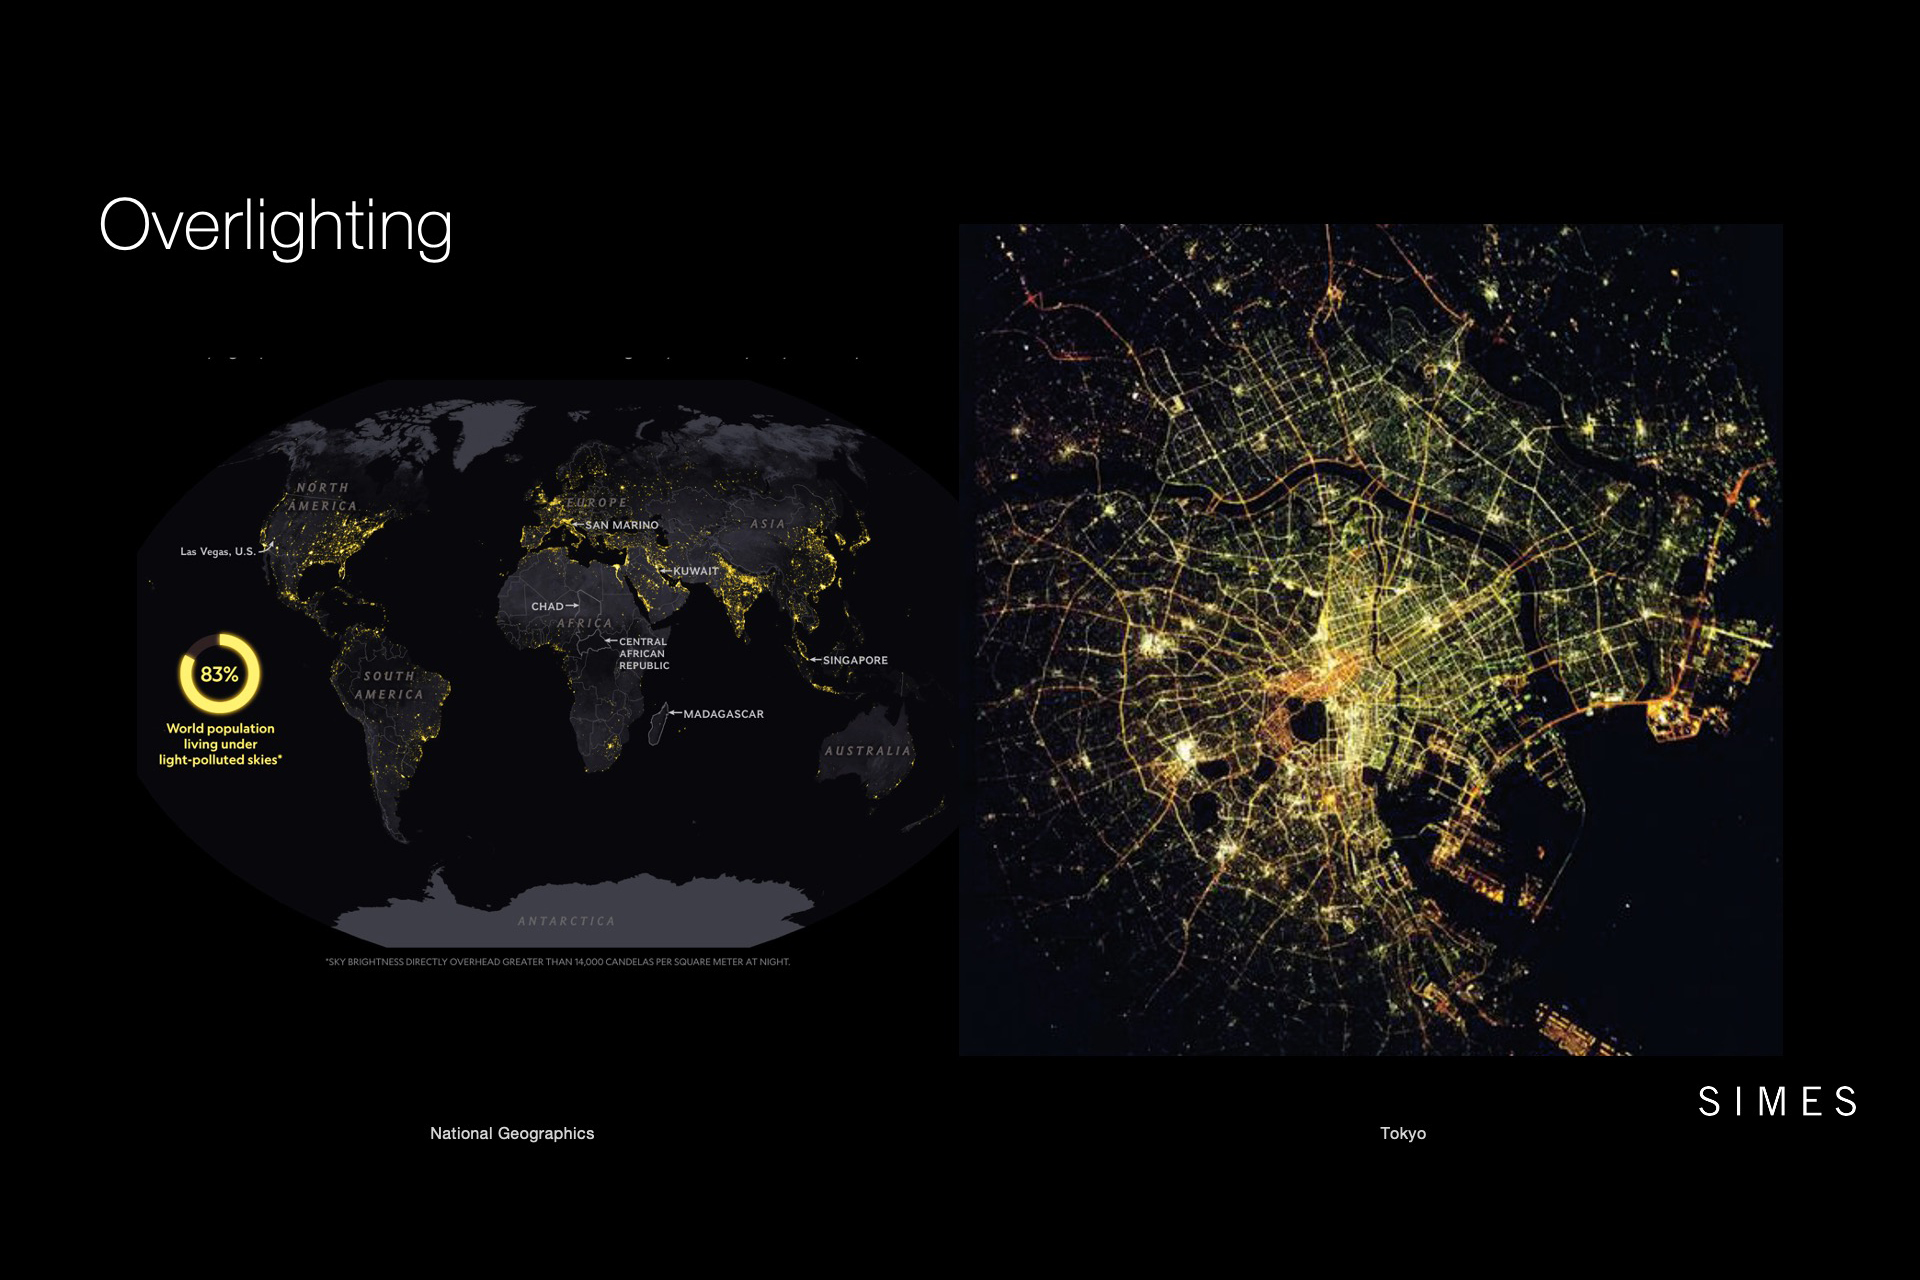 Source: National Geographic. 83% of the earth's population lives under a polluted sky despite more than 70% of people not having direct access to a main electricity …. Right photo: Tokyo. Megalopolis chosen as a virtuous model thanks to its study for an homogeneous light distribution. 